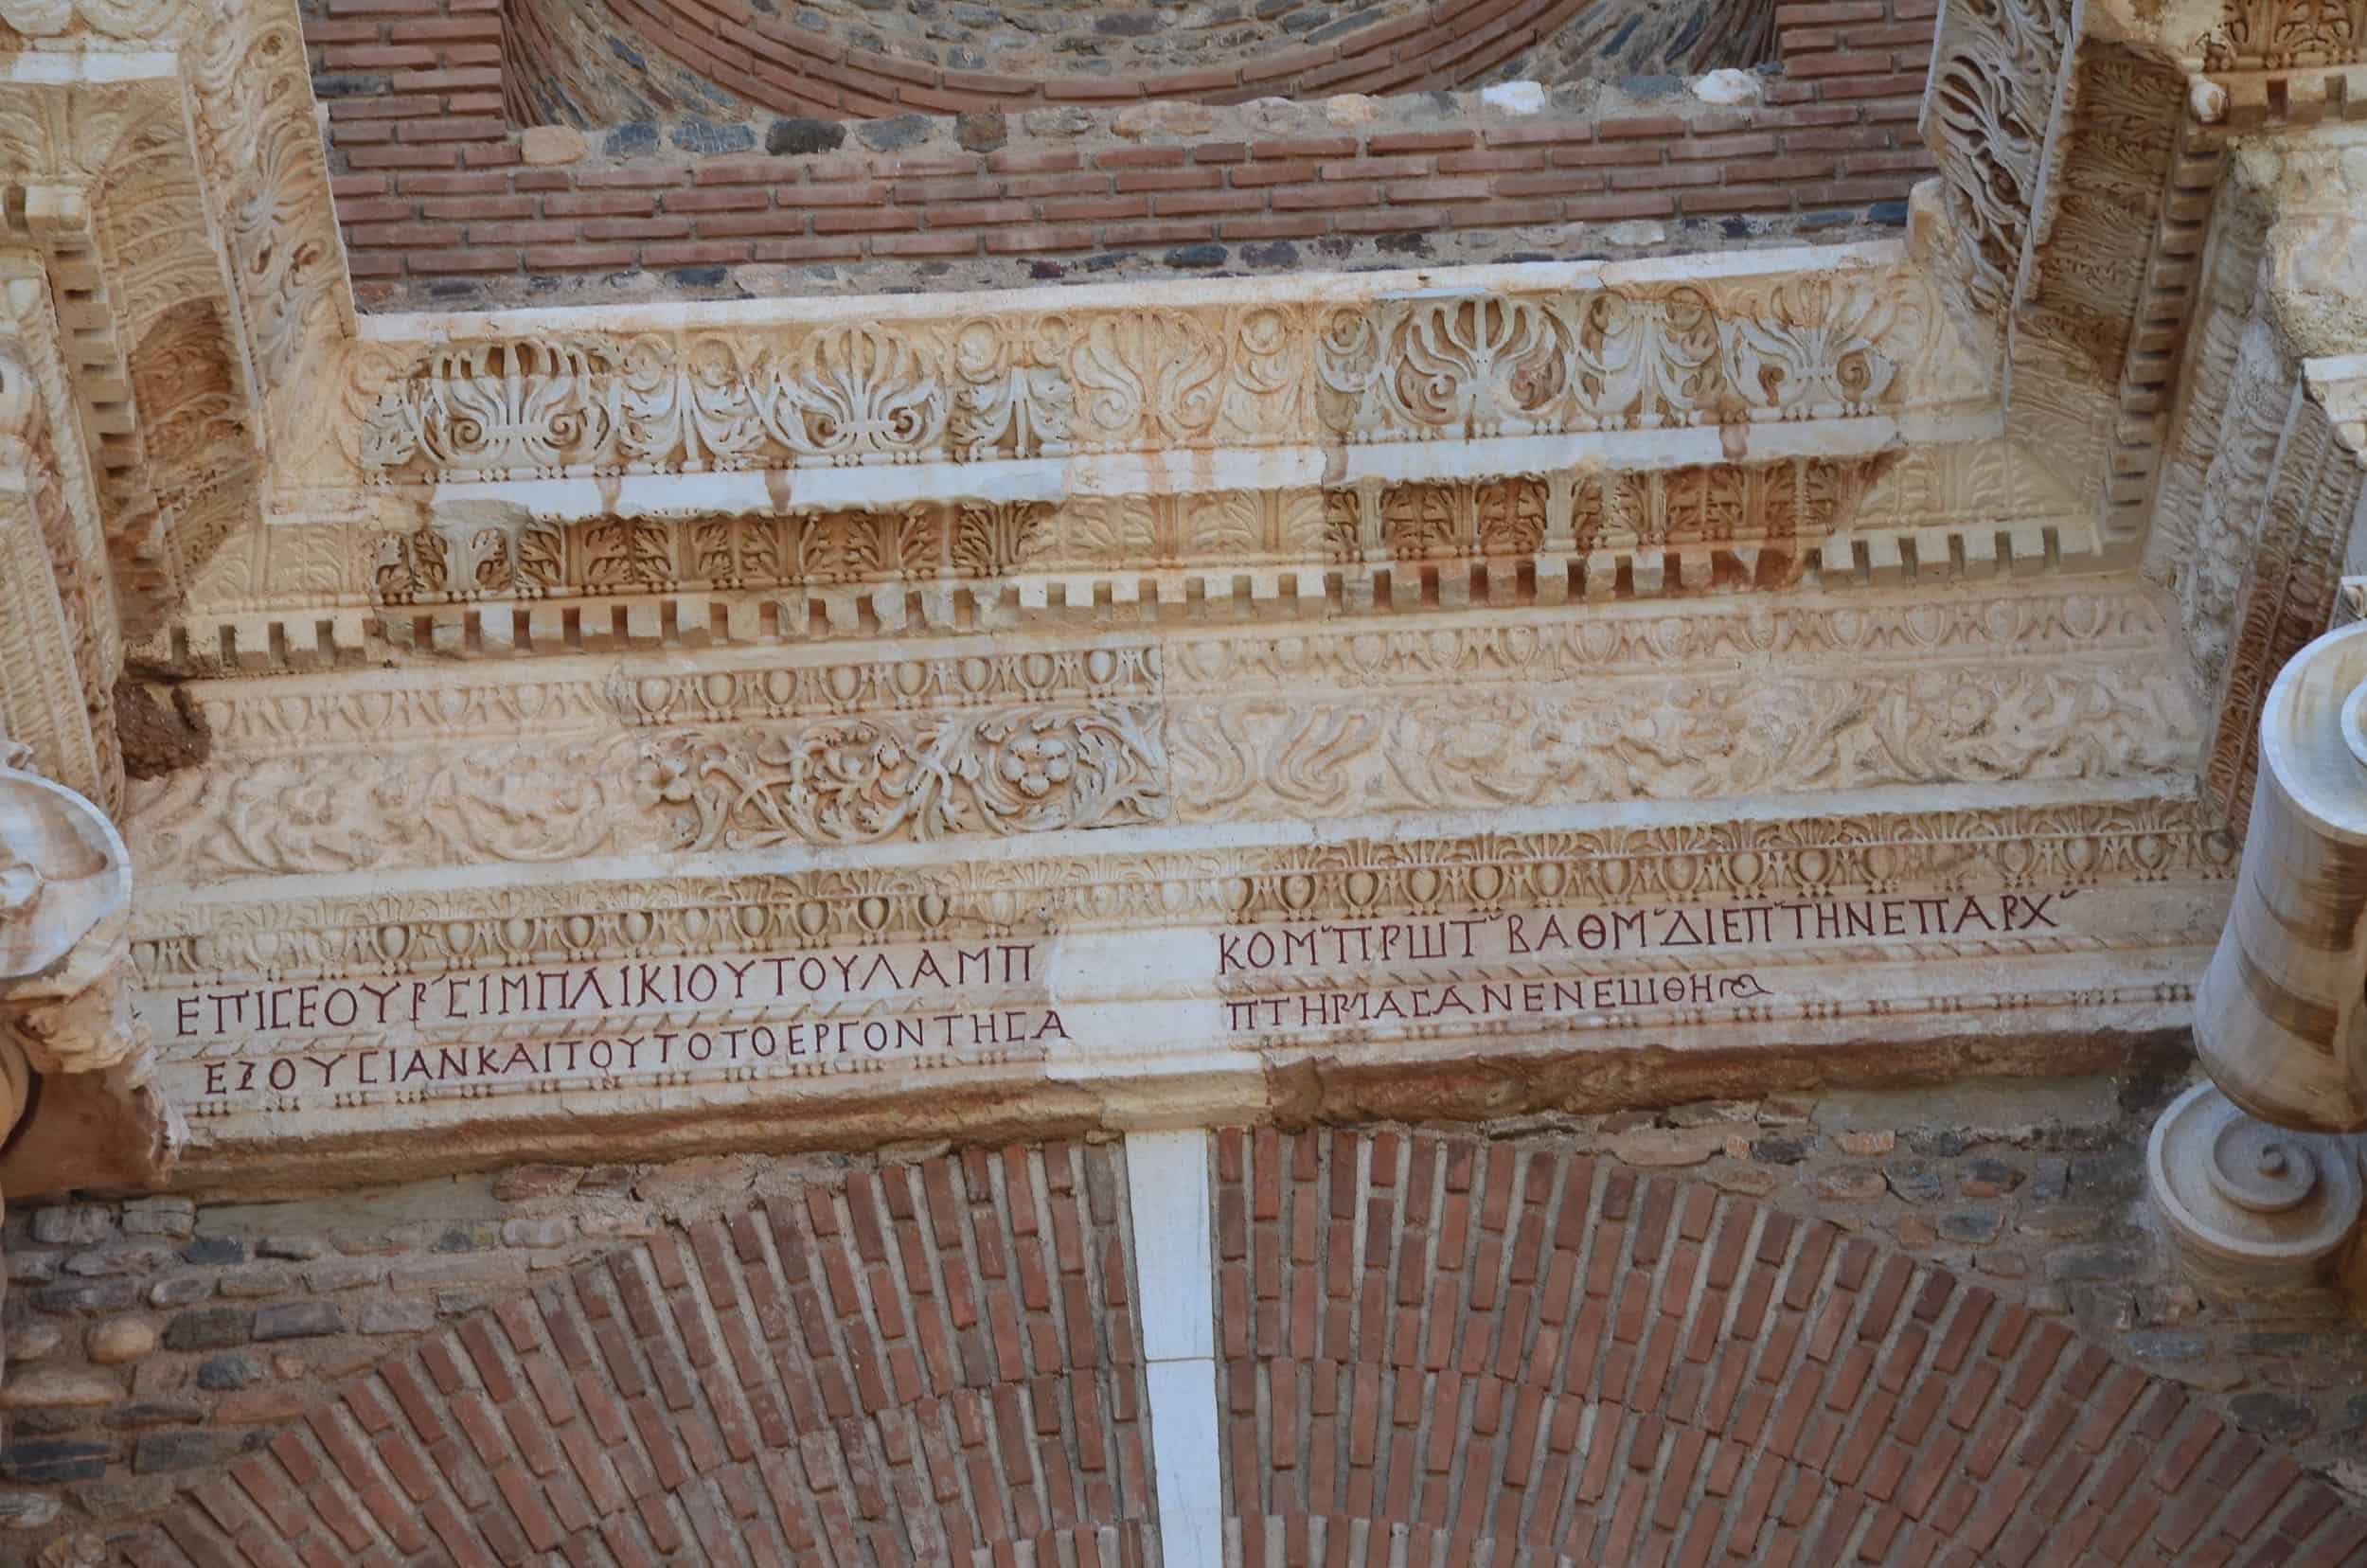 Inscriptions and frieze under the apse in the Marble Court